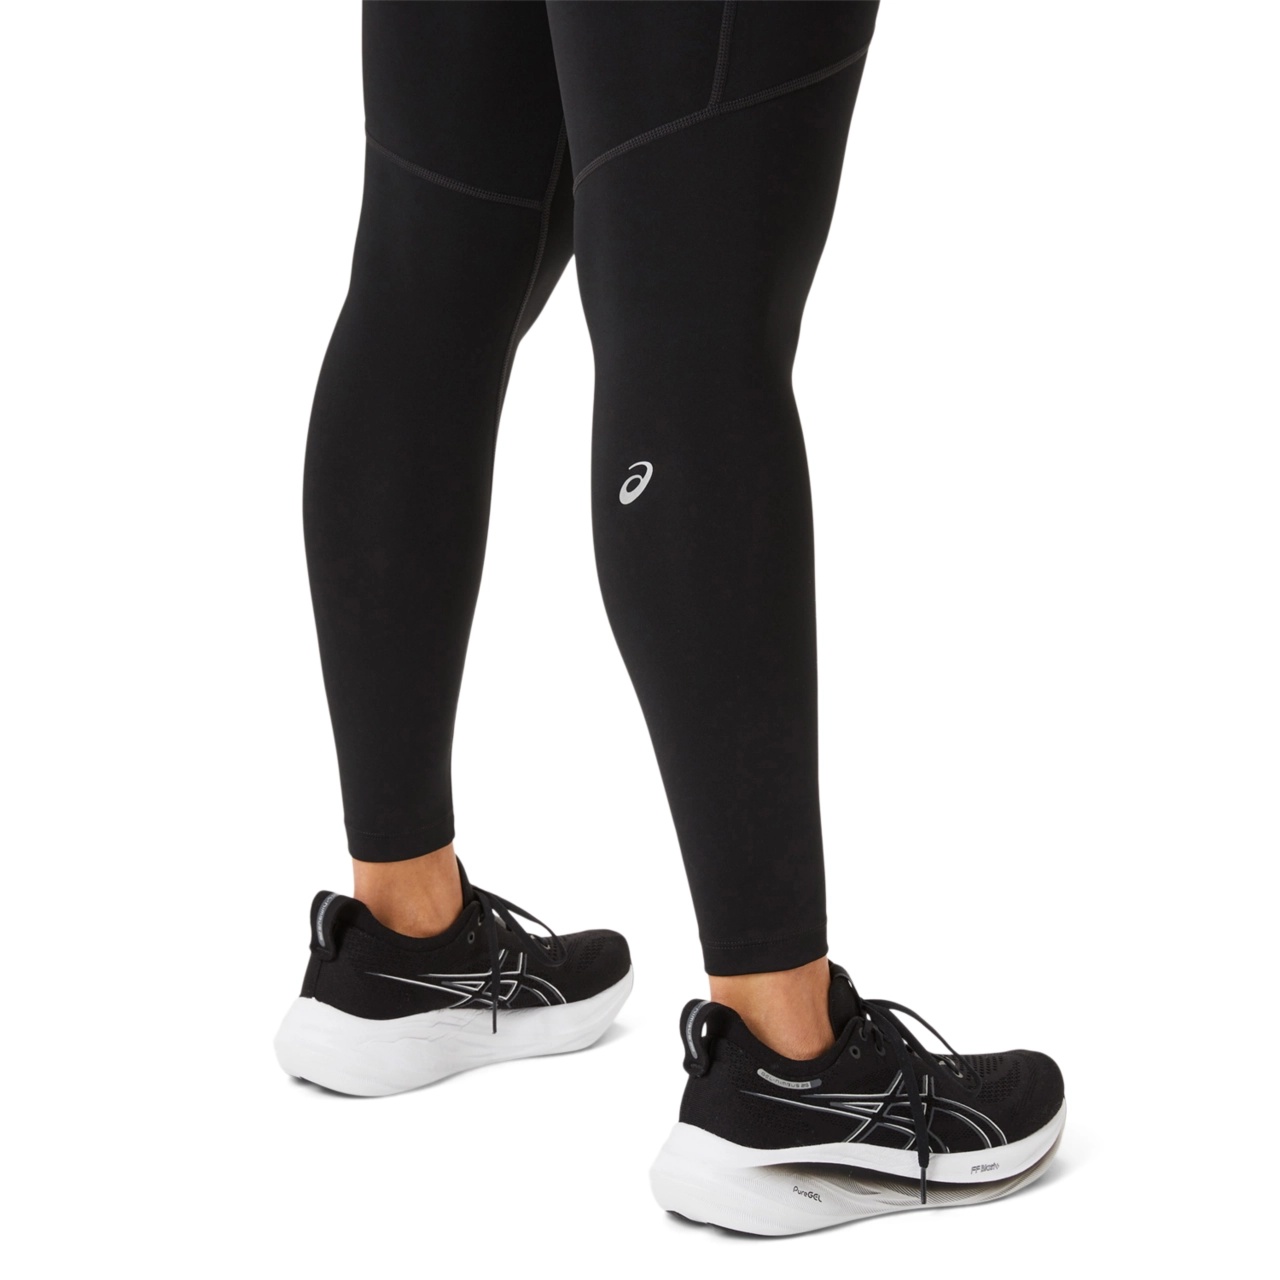 WOMEN'S NEW STRONG 92 PRINTED TIGHT - 4